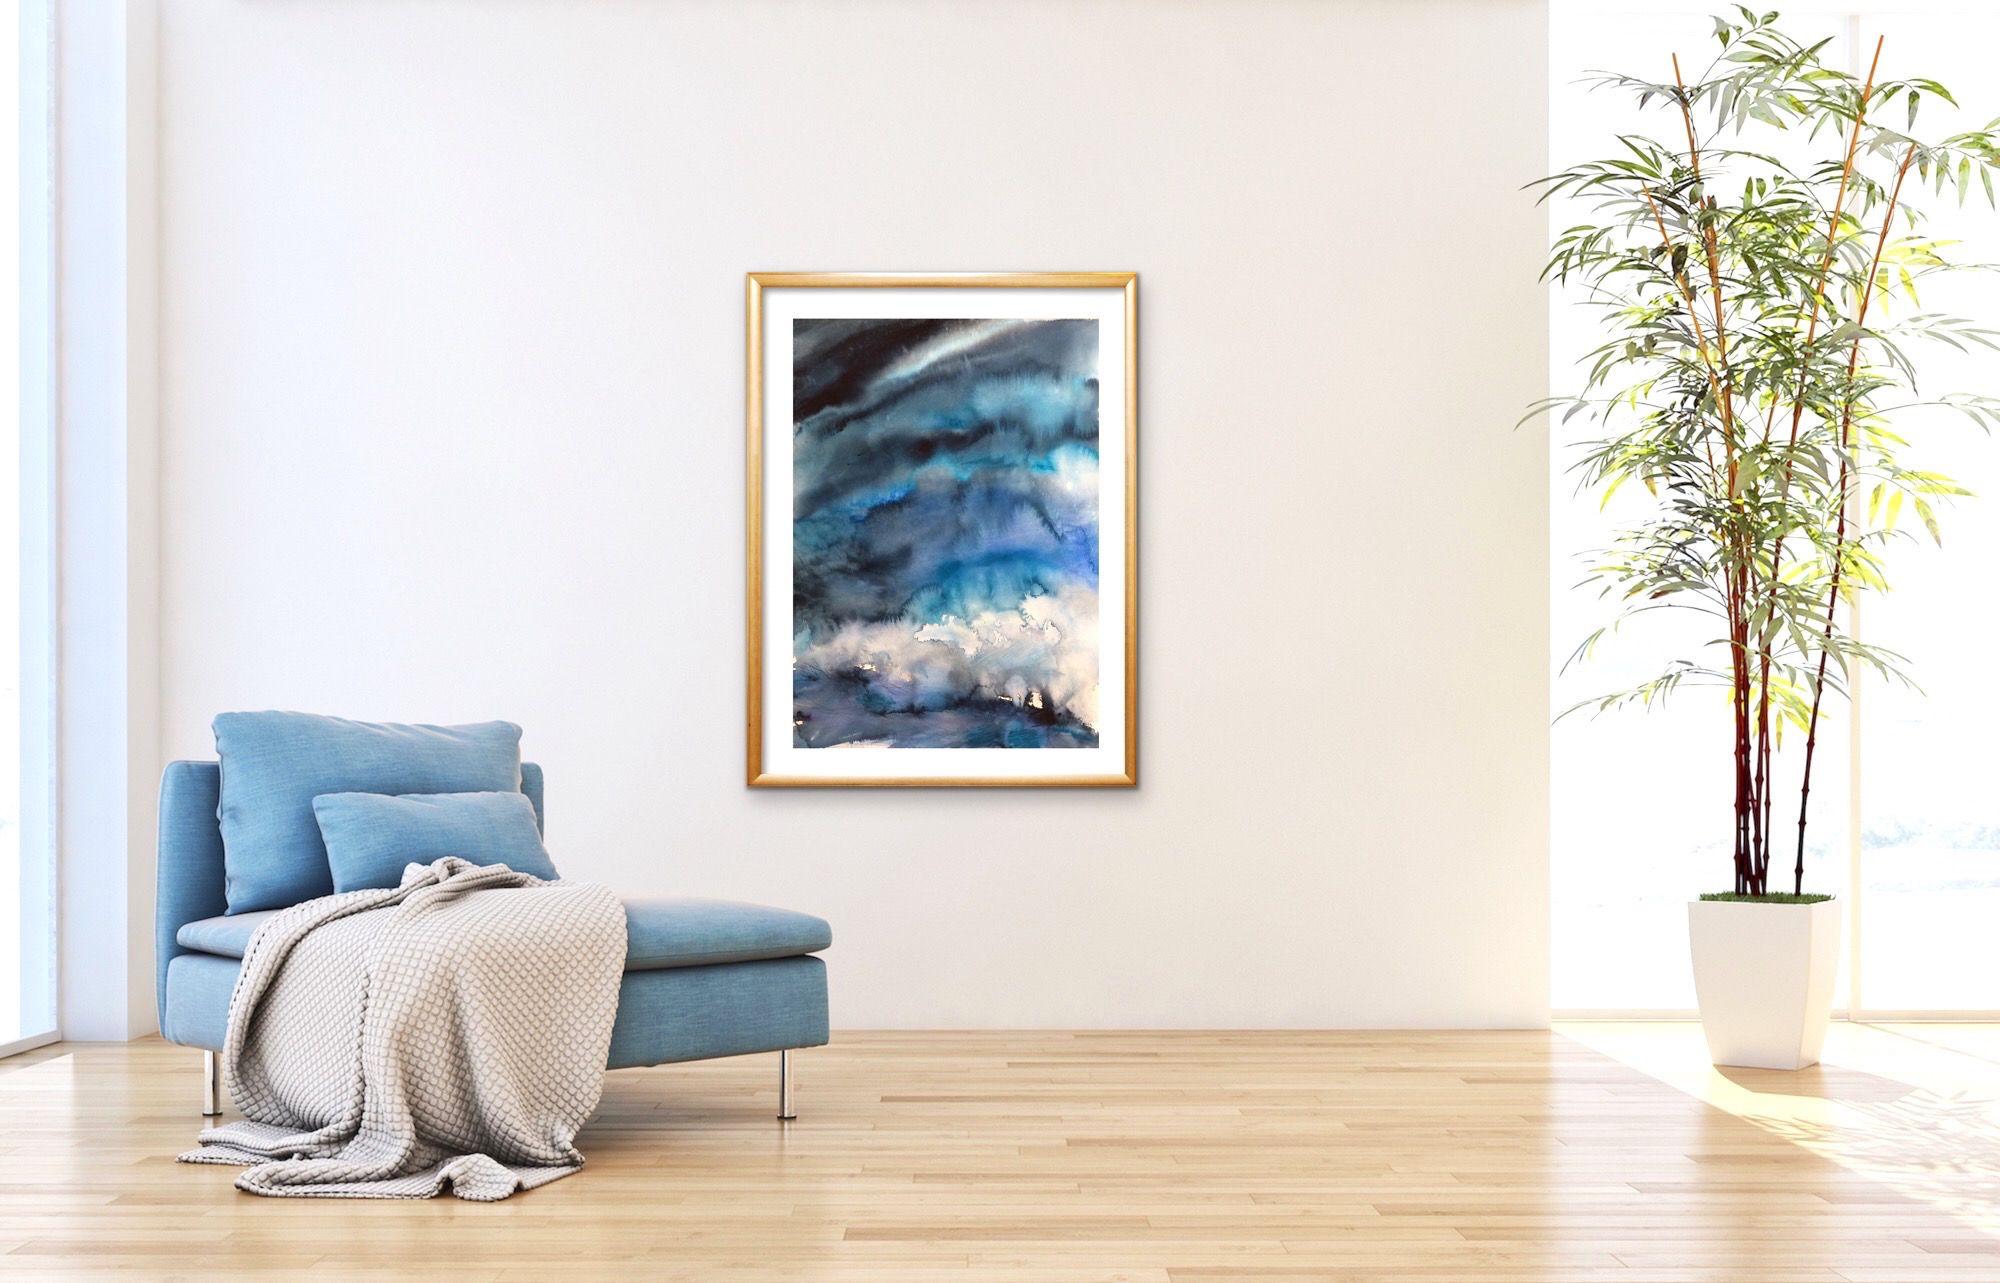 A big size contemporary watercolor about the fantastic light at the Baltic Sea, when the autumn storms are coming, a real statement piece. I love this beautiful blue atmosphere and that can also be seen as a metaphor for emotions and inner feelings.